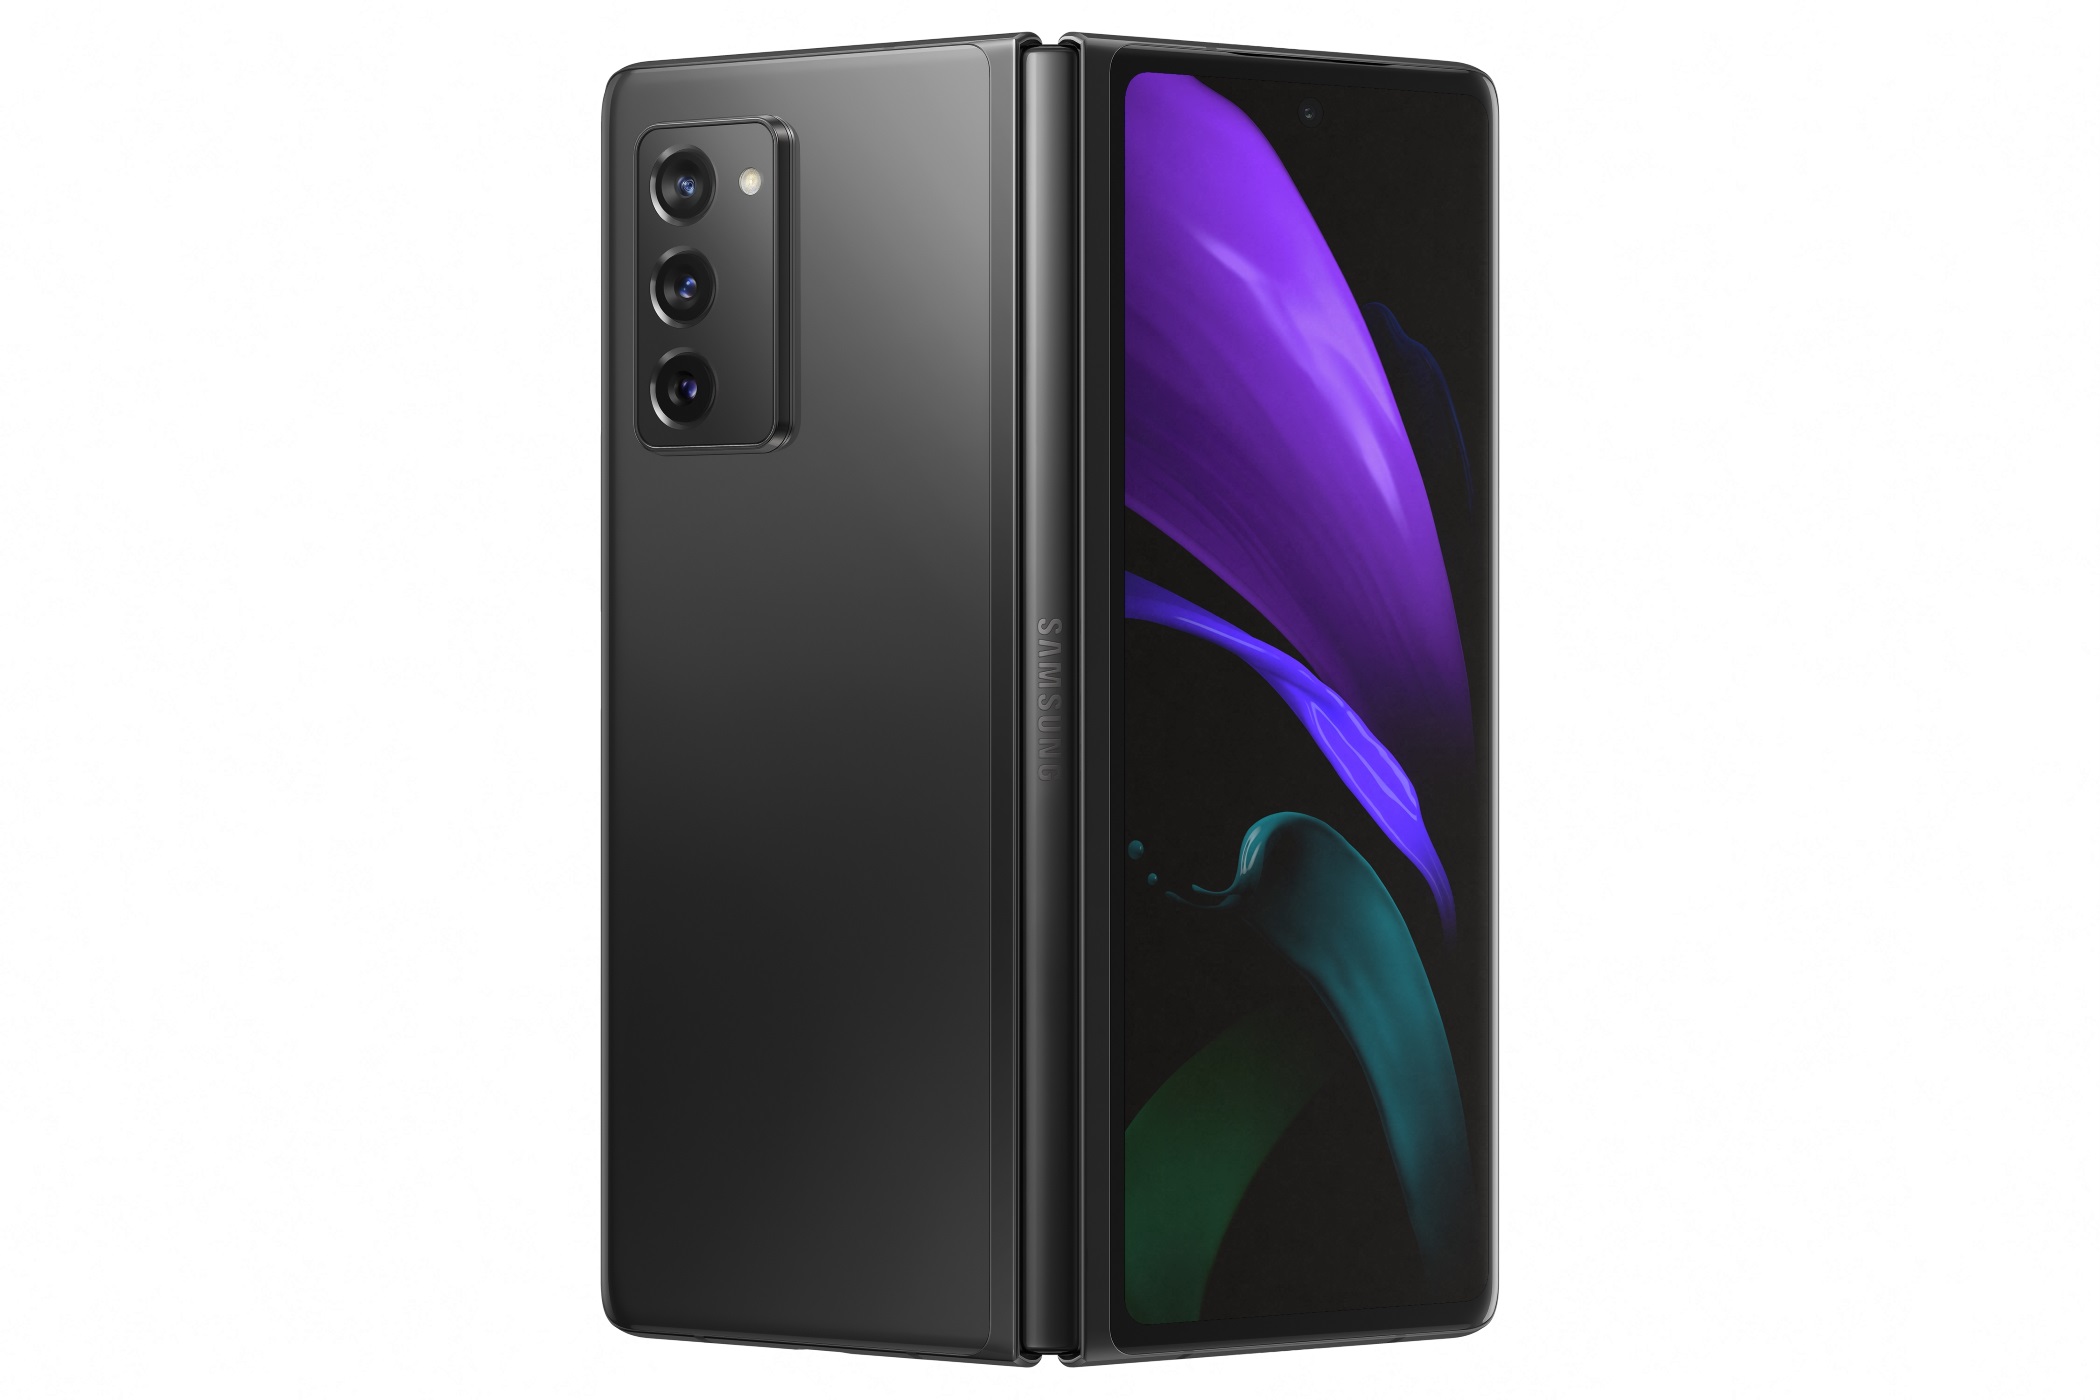 Image for The Next-Generation Features That Seamlessly Integrate The Galaxy Z Fold2 5G With The Galaxy Ecosystem